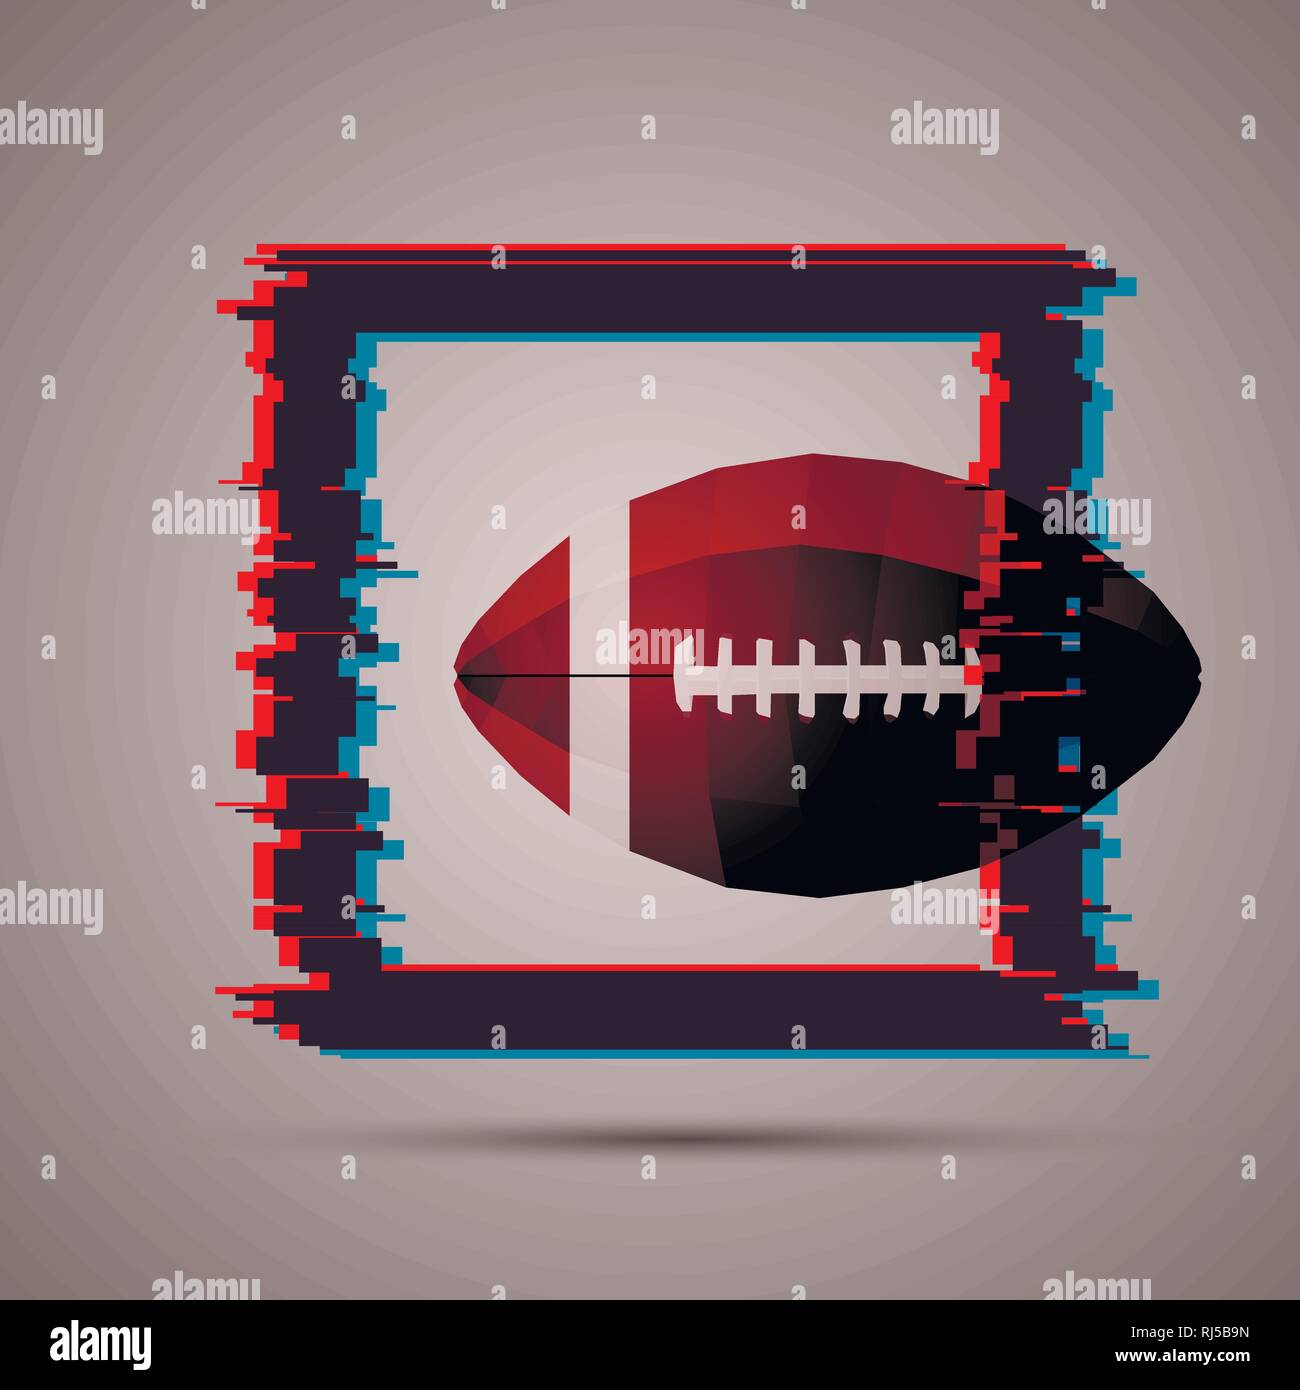 Creative vector illustration with football ball in low poly and square with glitch effect. Stock Vector